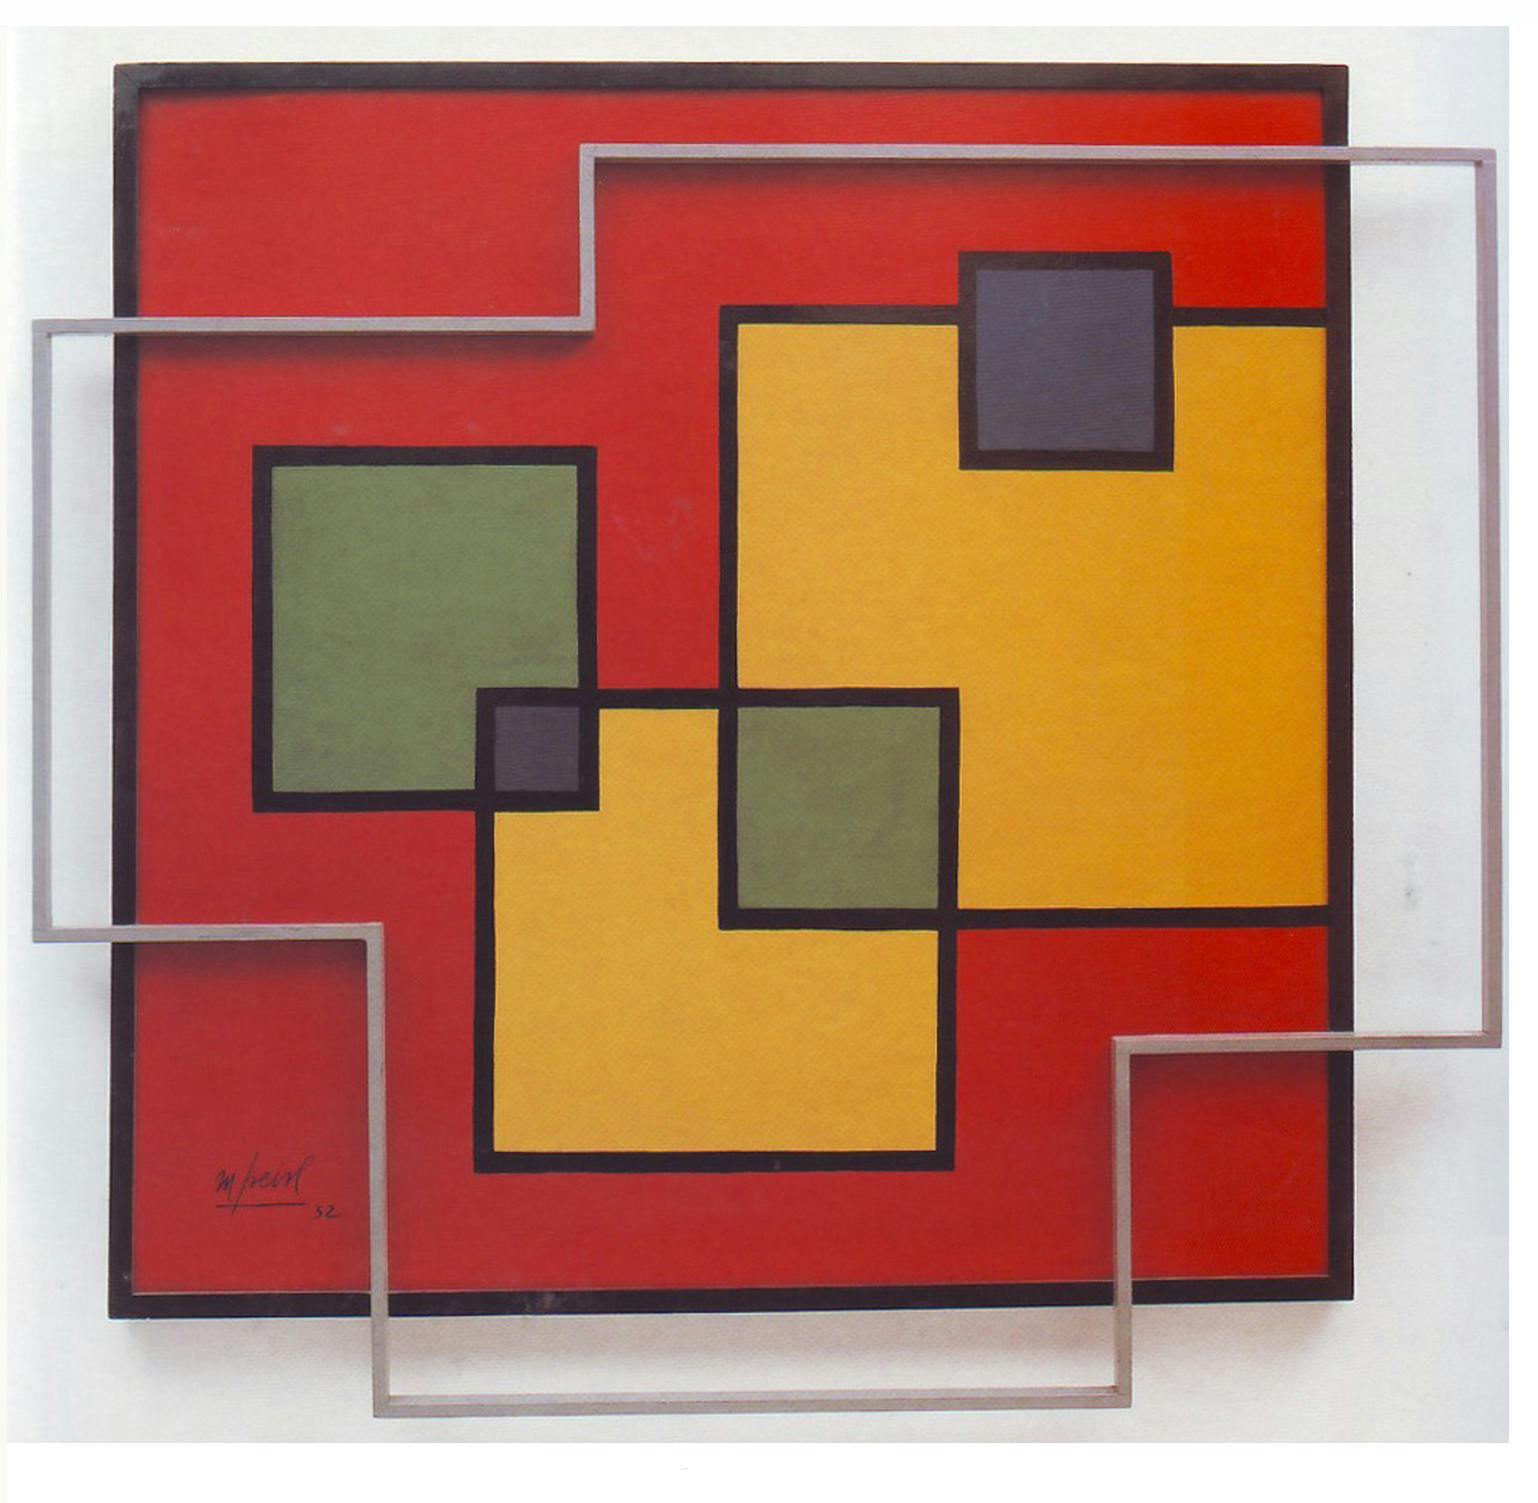 A painting of various overlapping polygons in red, yellow, purple, and green.